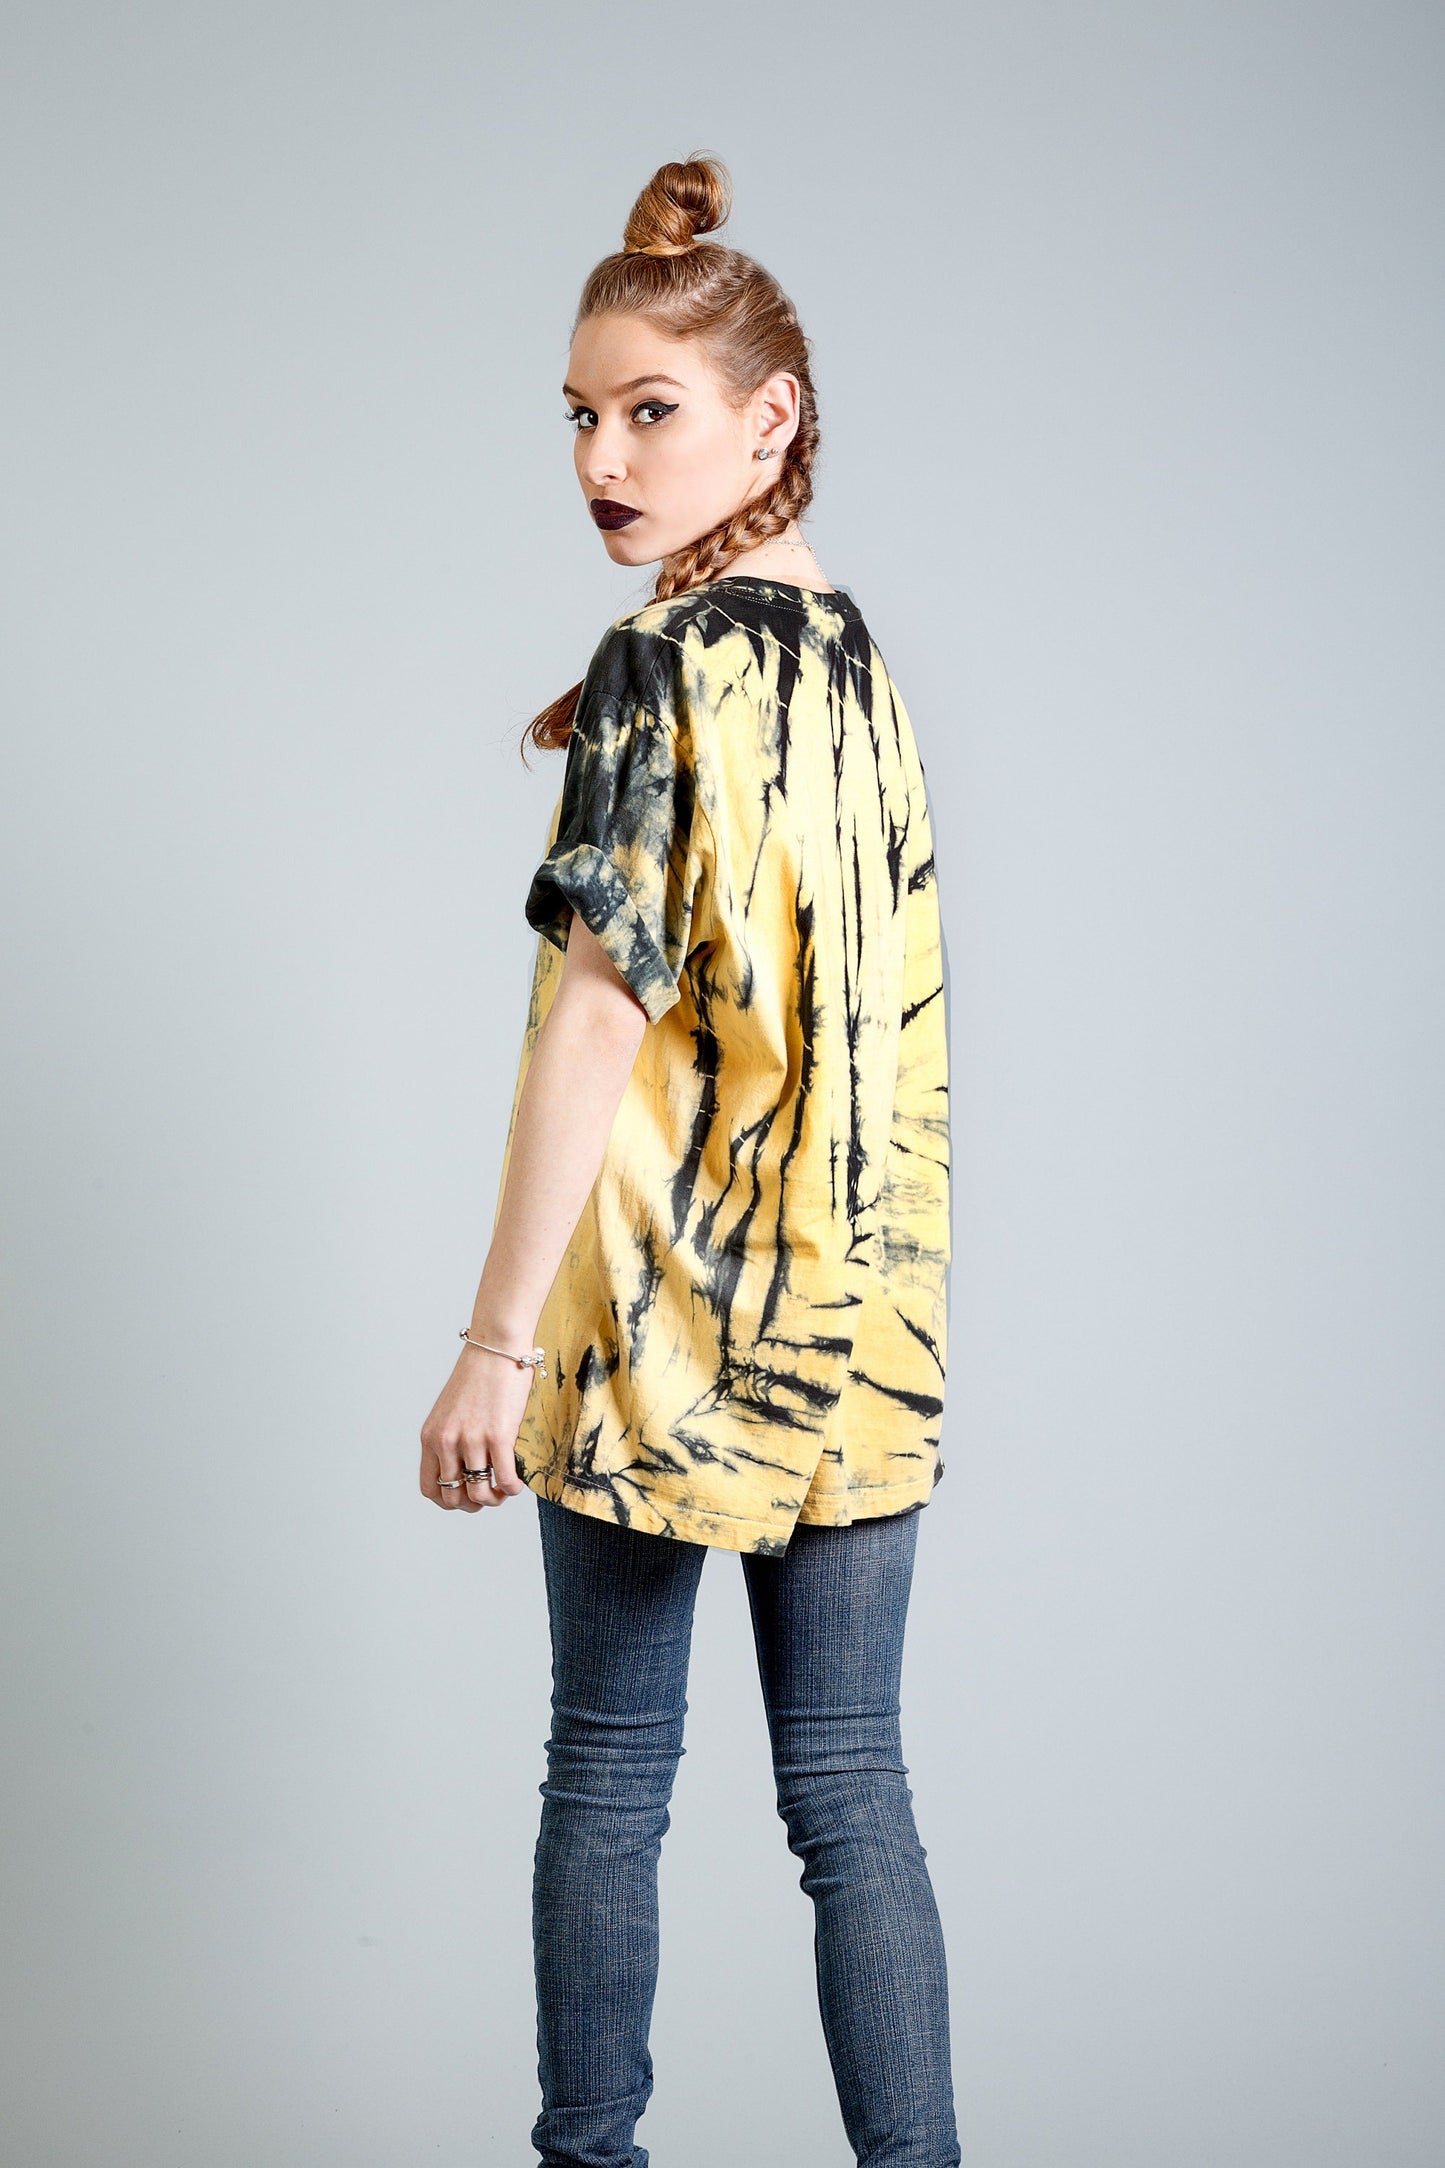 All twisted up tie dye shirt in Acid yellow & black  | unisex